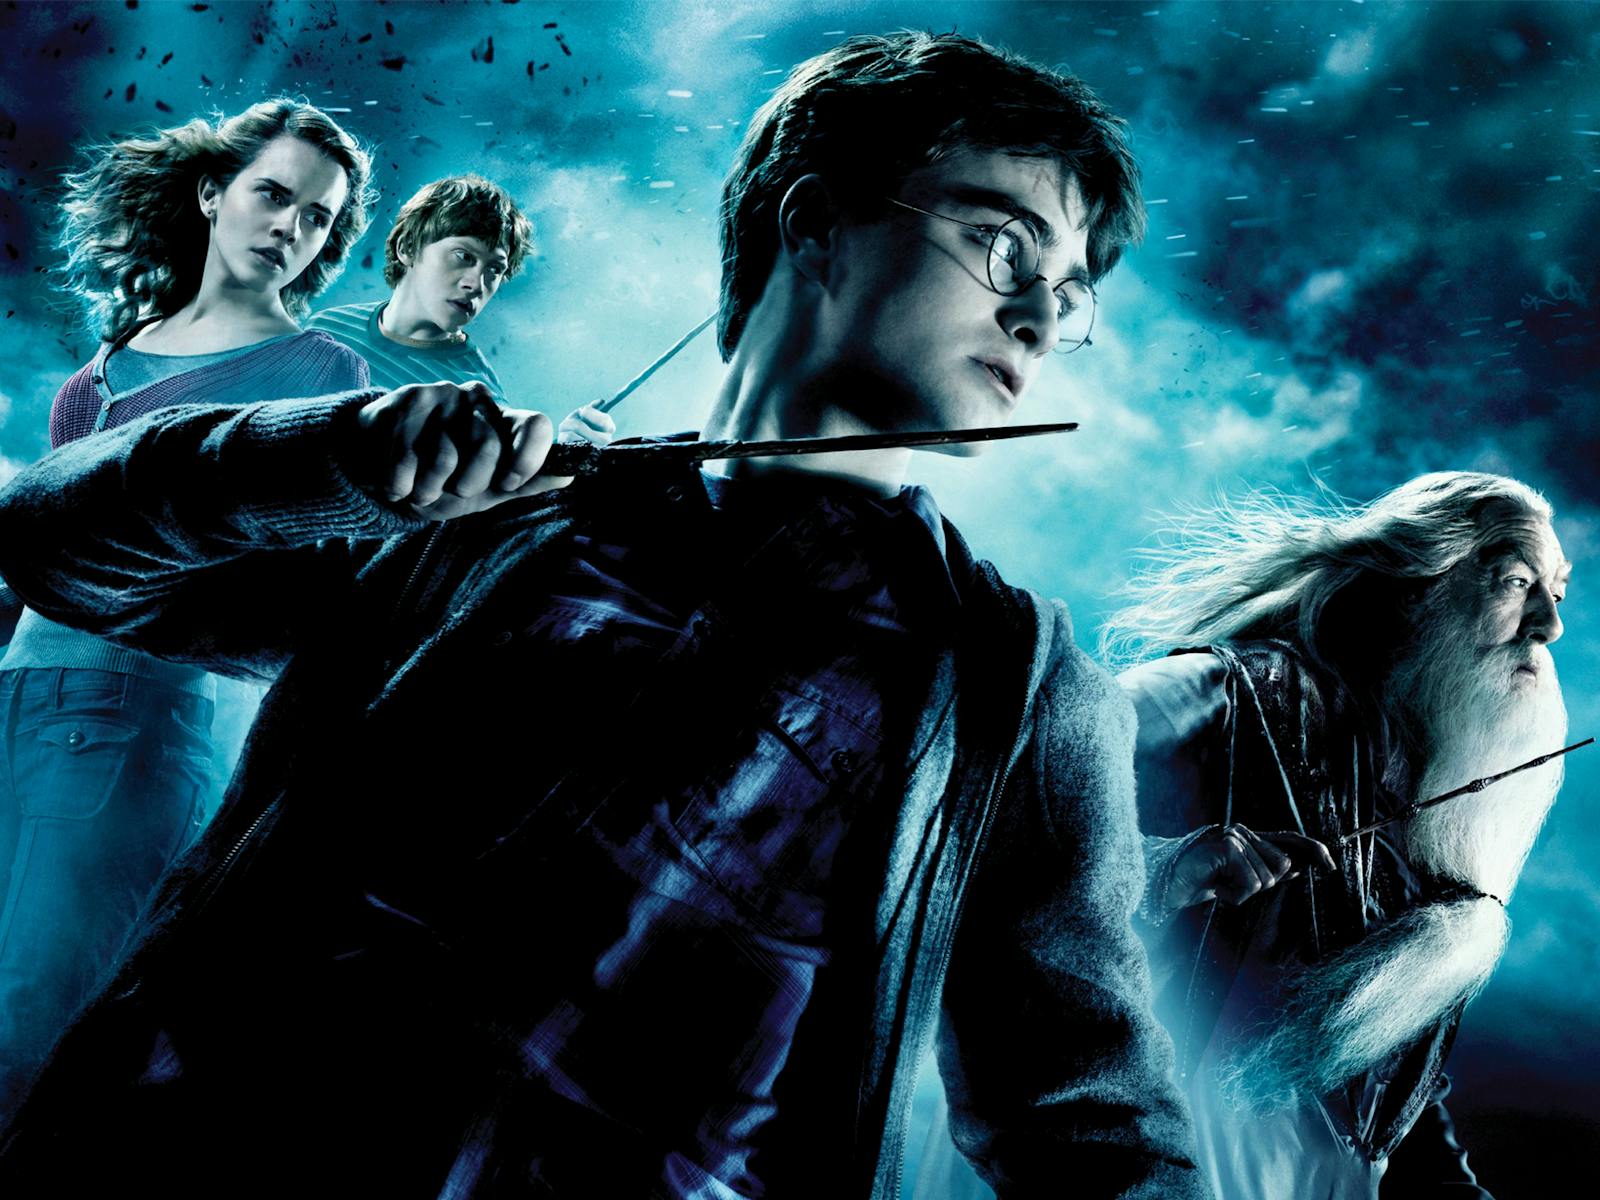 Image for Harry Potter and the Half-Blood Prince in Concert